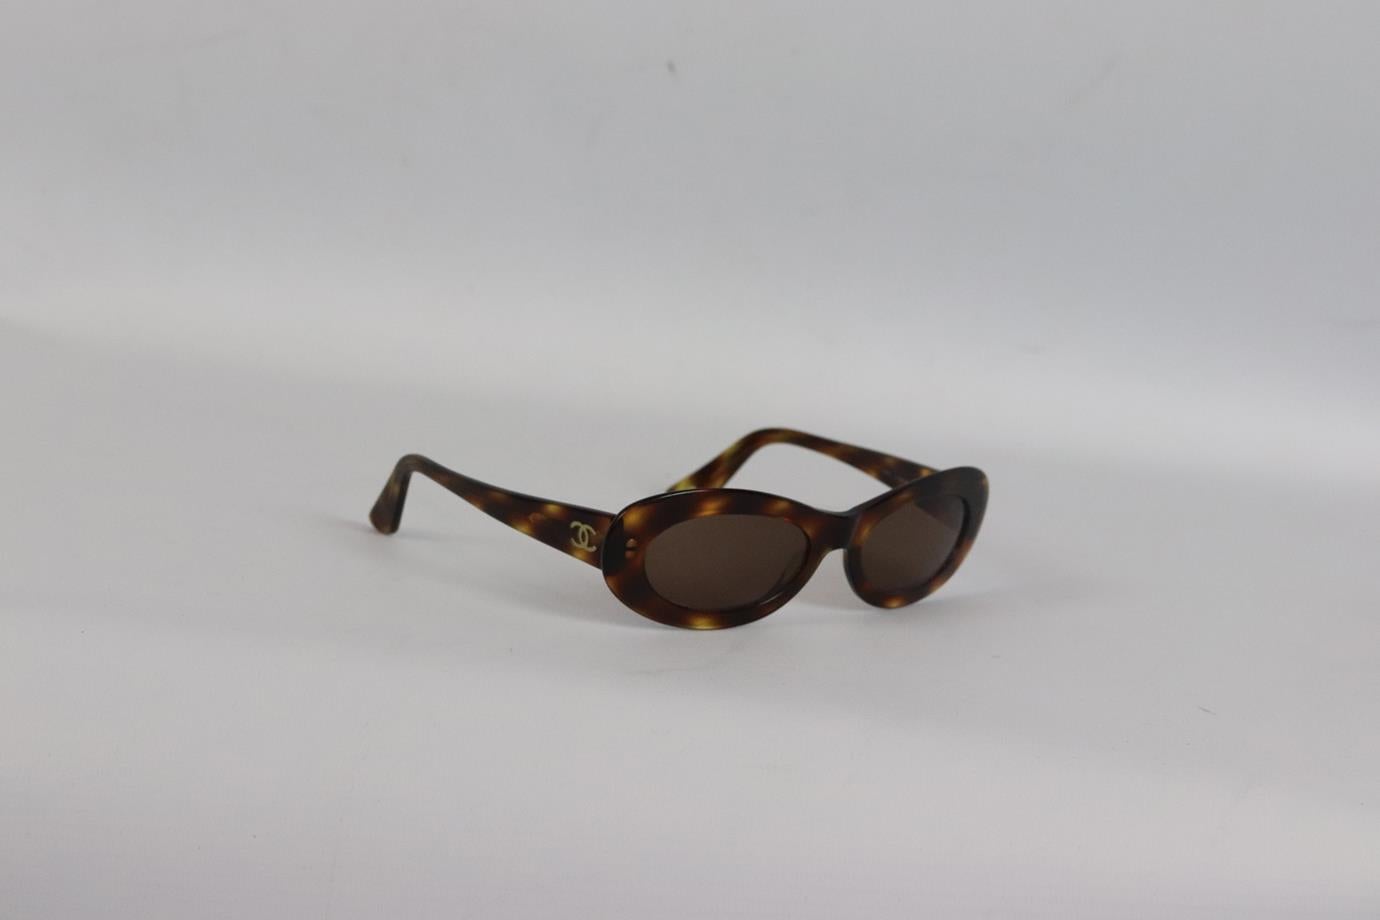 Chanel 1990's vintage oval frame tortoiseshell acetate sunglasses. Brown. Comes with case. Style code: 5007 c502/93. Lens Size: 52 mm. Arm Size: 135 mm. Bridge Size: 19 mm. Fair condition - Wear consistent with age. Signs of wear throughout.